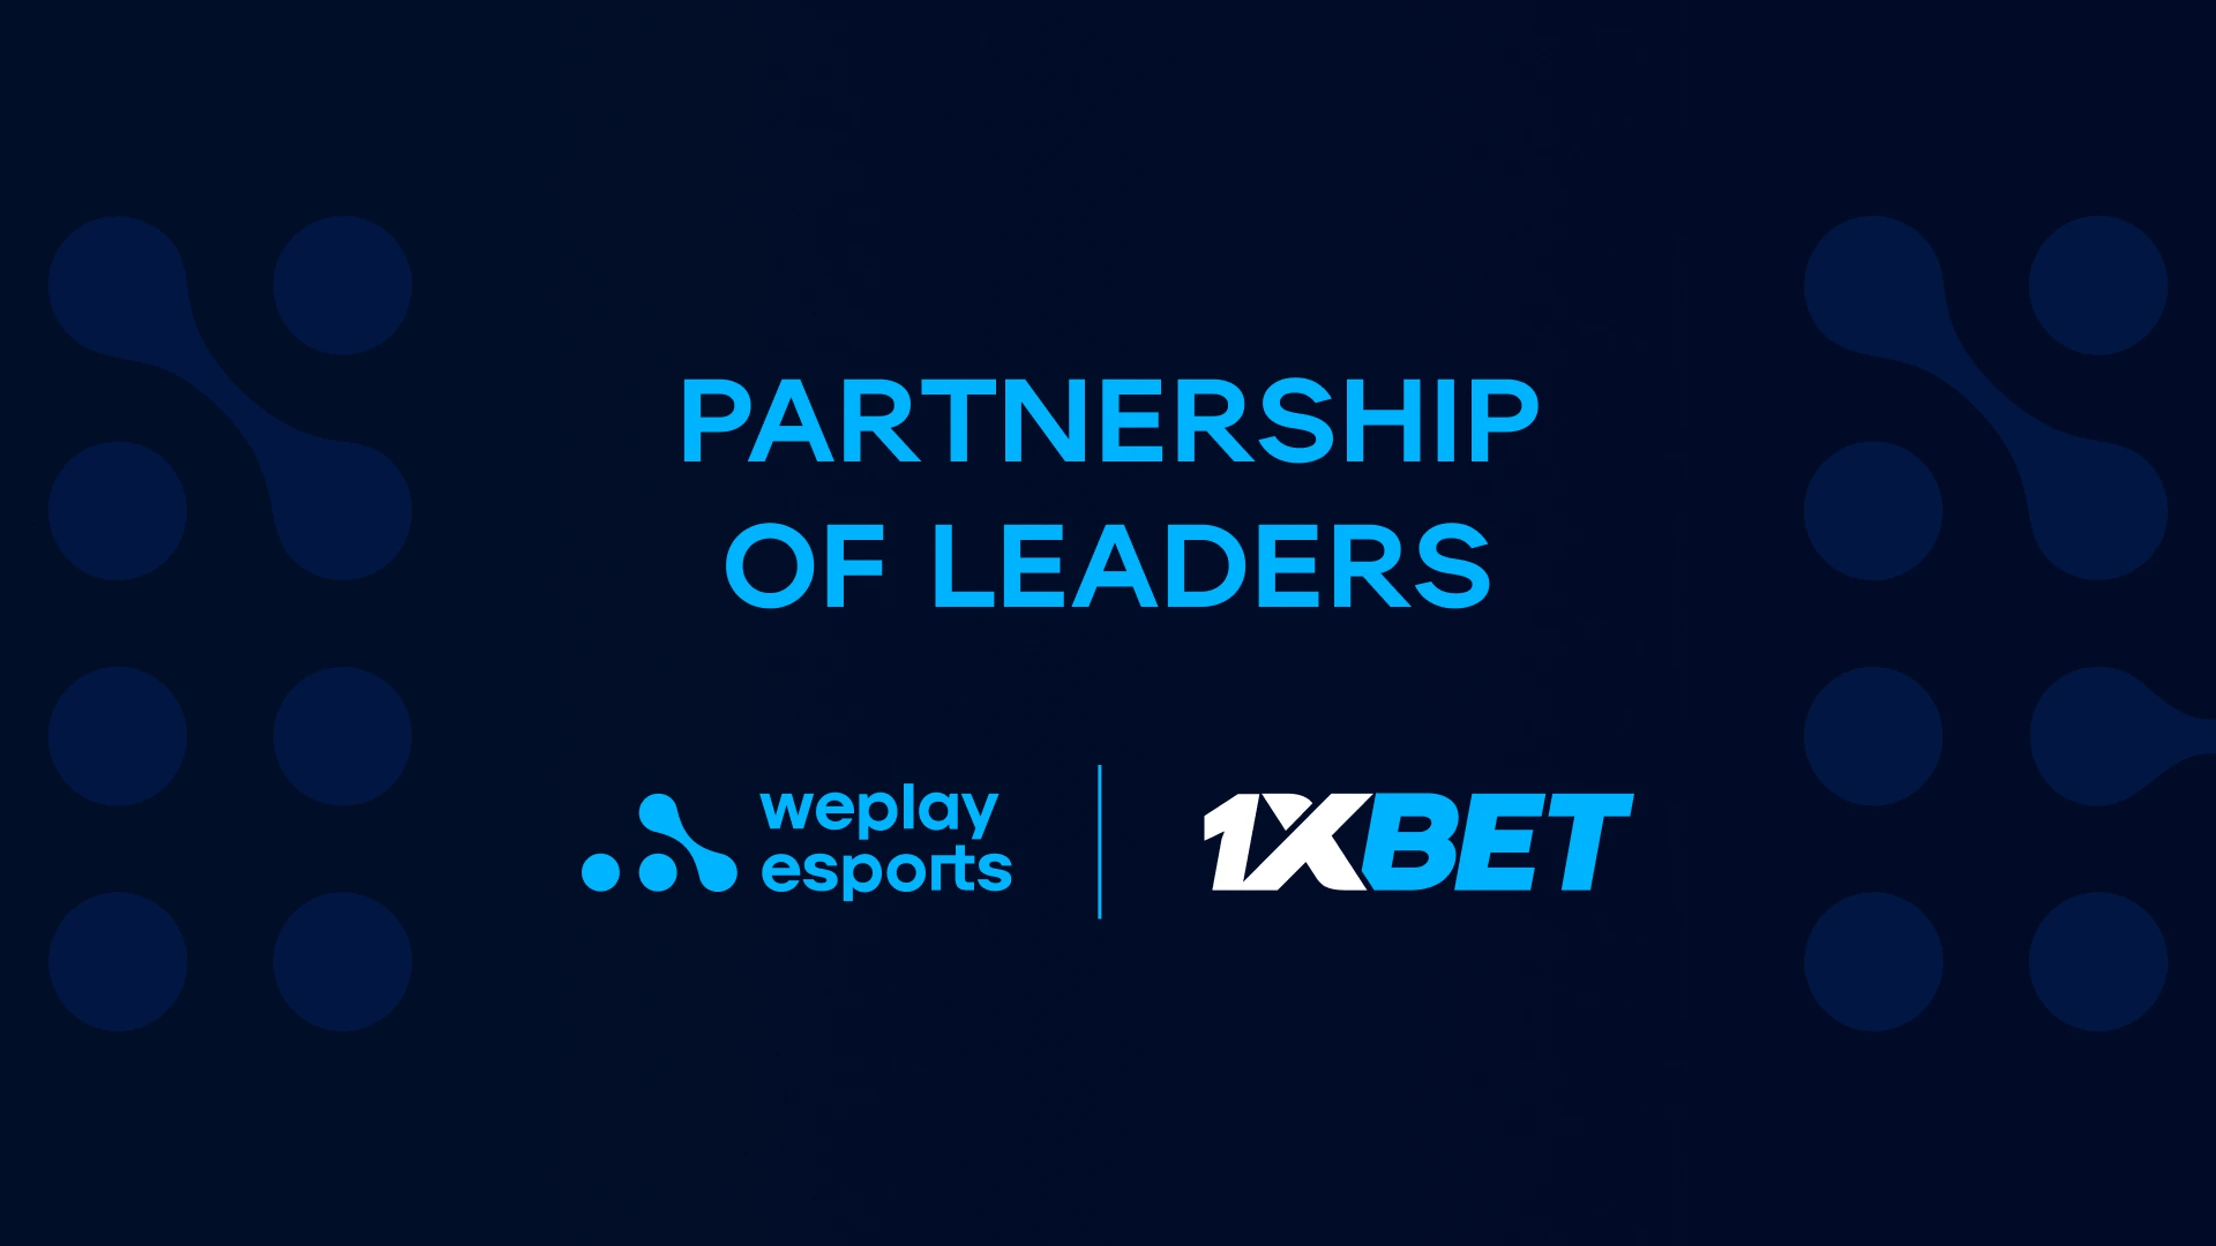 WePlay Esports and 1xBet: partnership of leaders